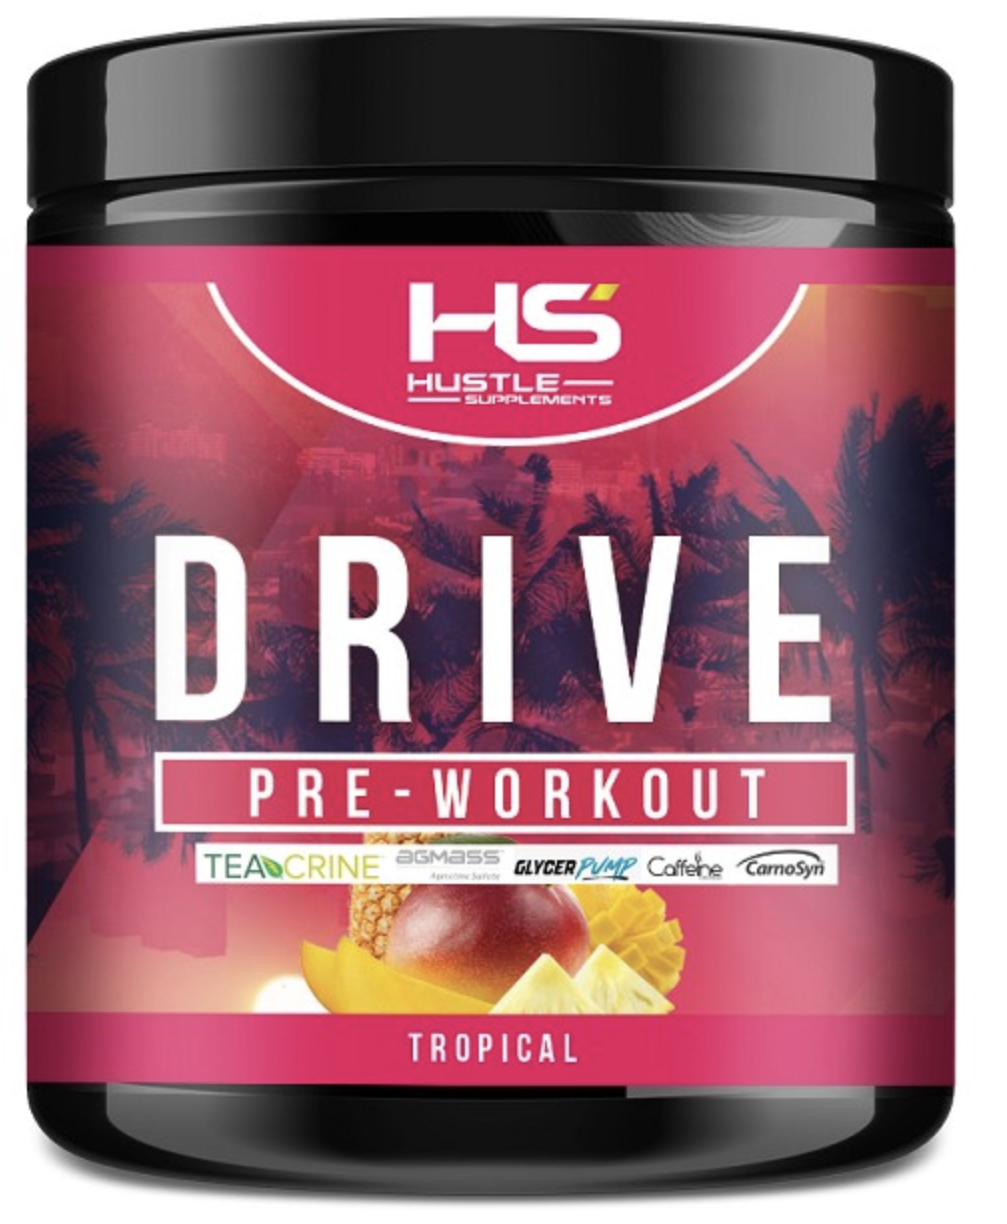 10 Minute Prime drive pre workout reviews for Gym